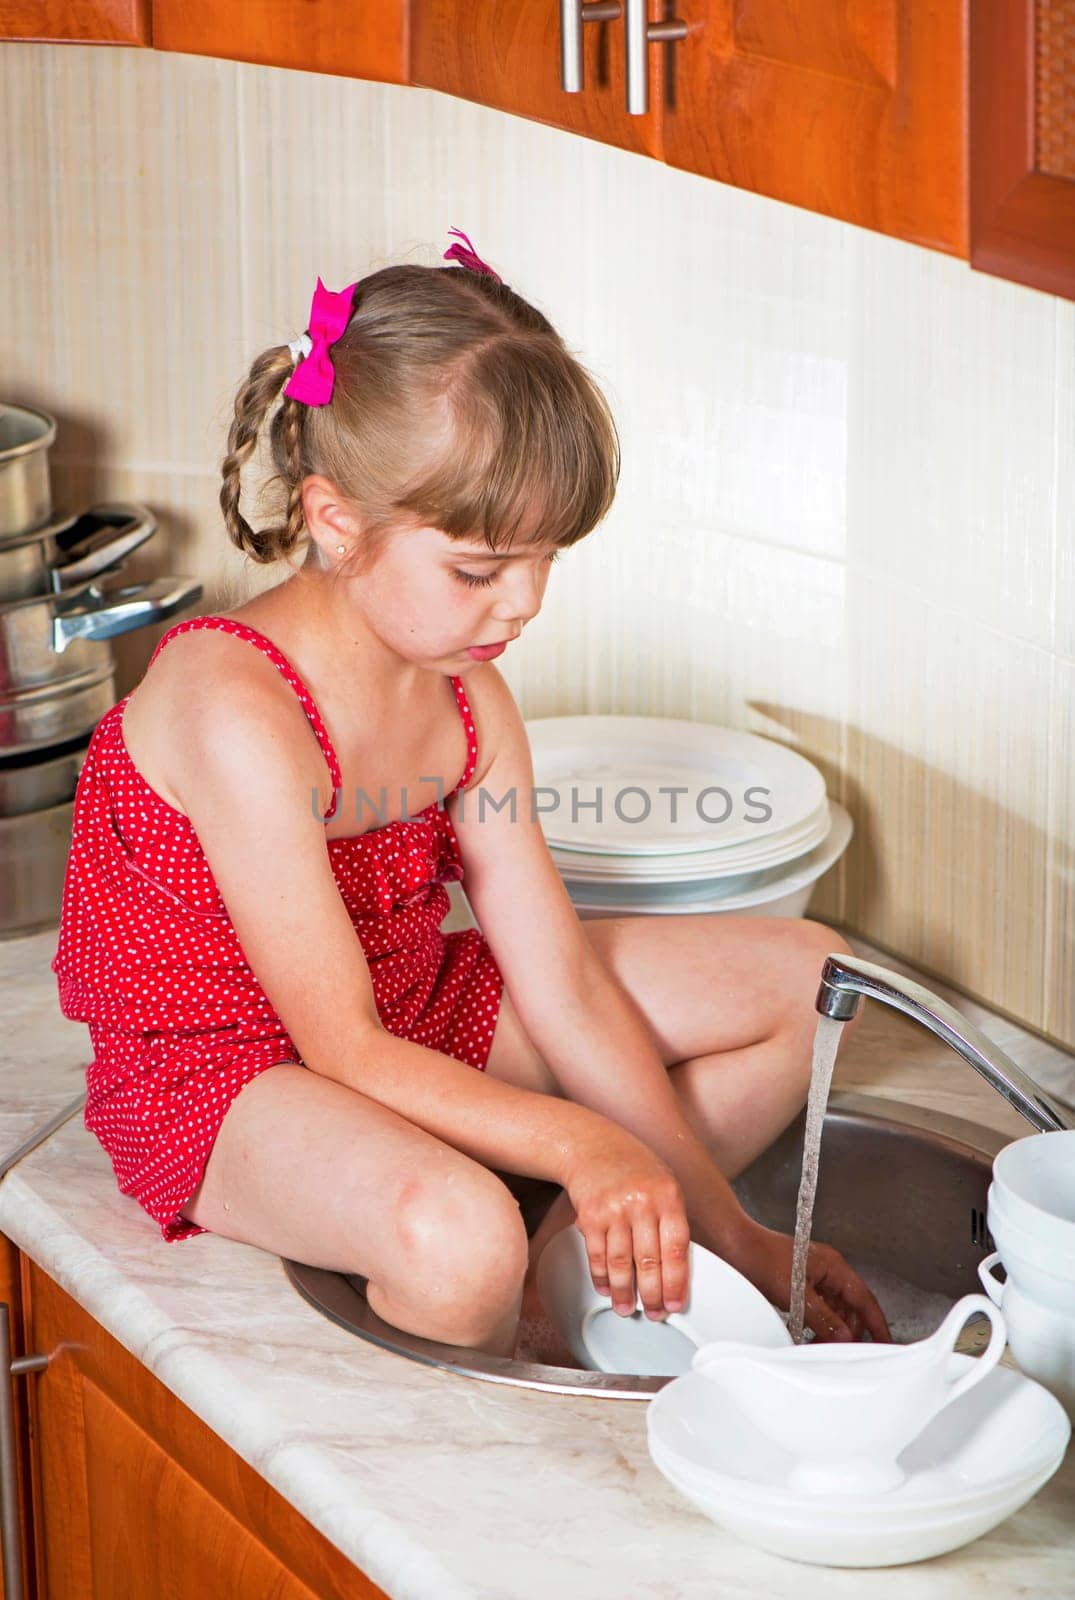 The concept of mother's helper, child development, family. Little girl washes white dishes at home in the kitchen by aprilphoto